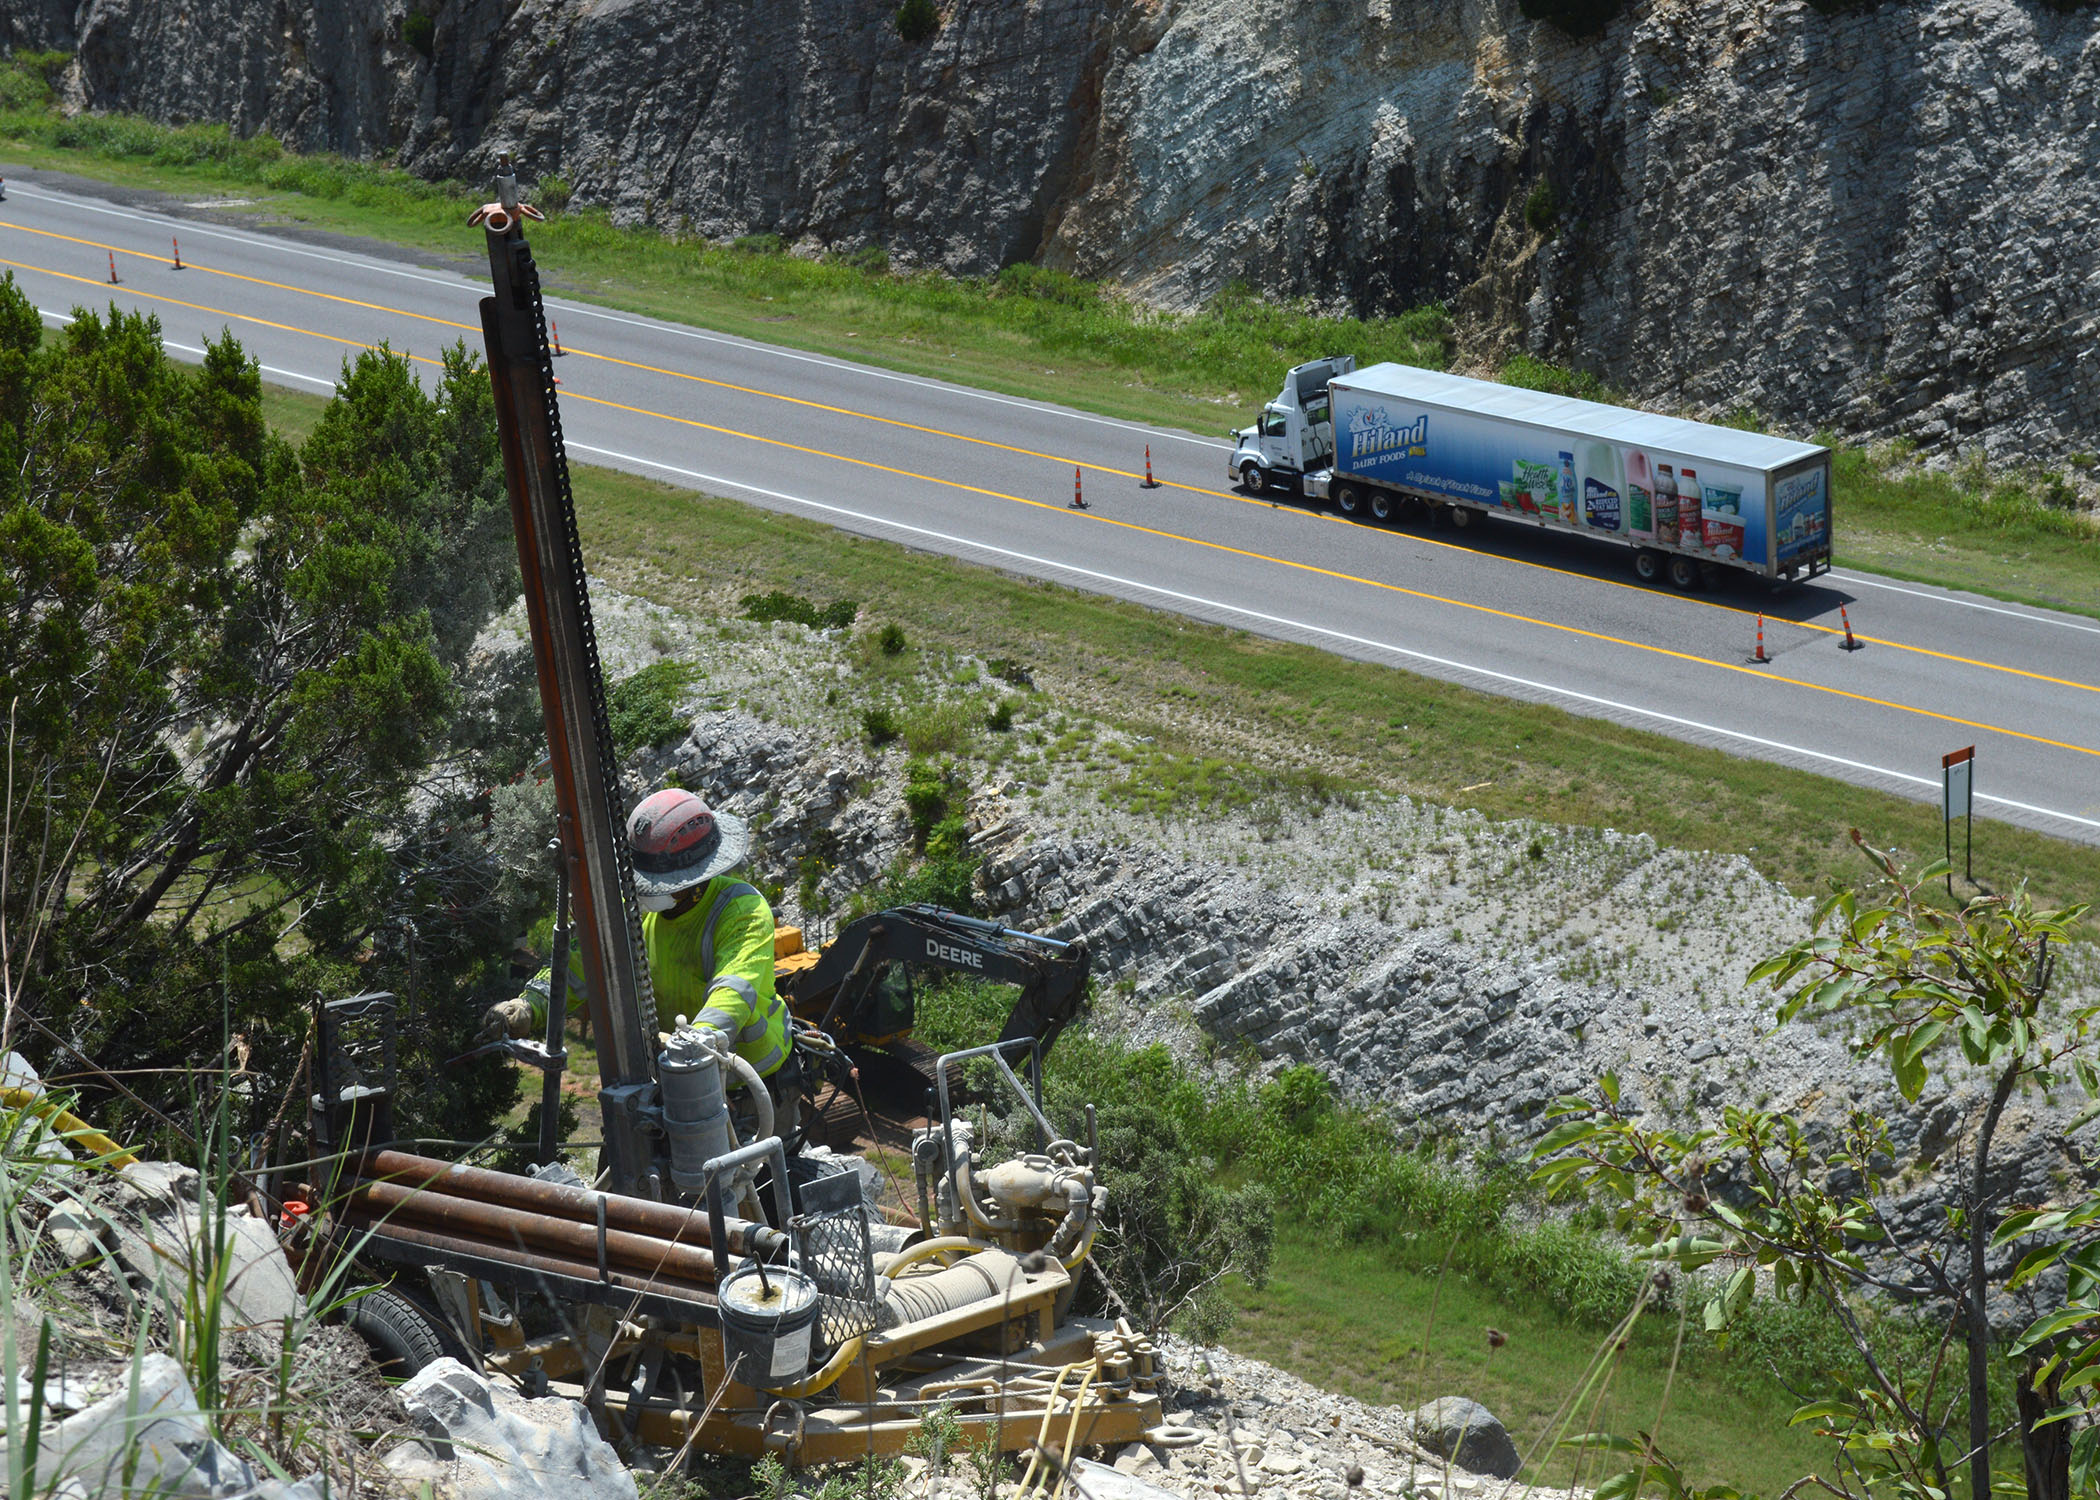 Work is underway to address the rock slide on I-35 in the Arbuckle Mountains.